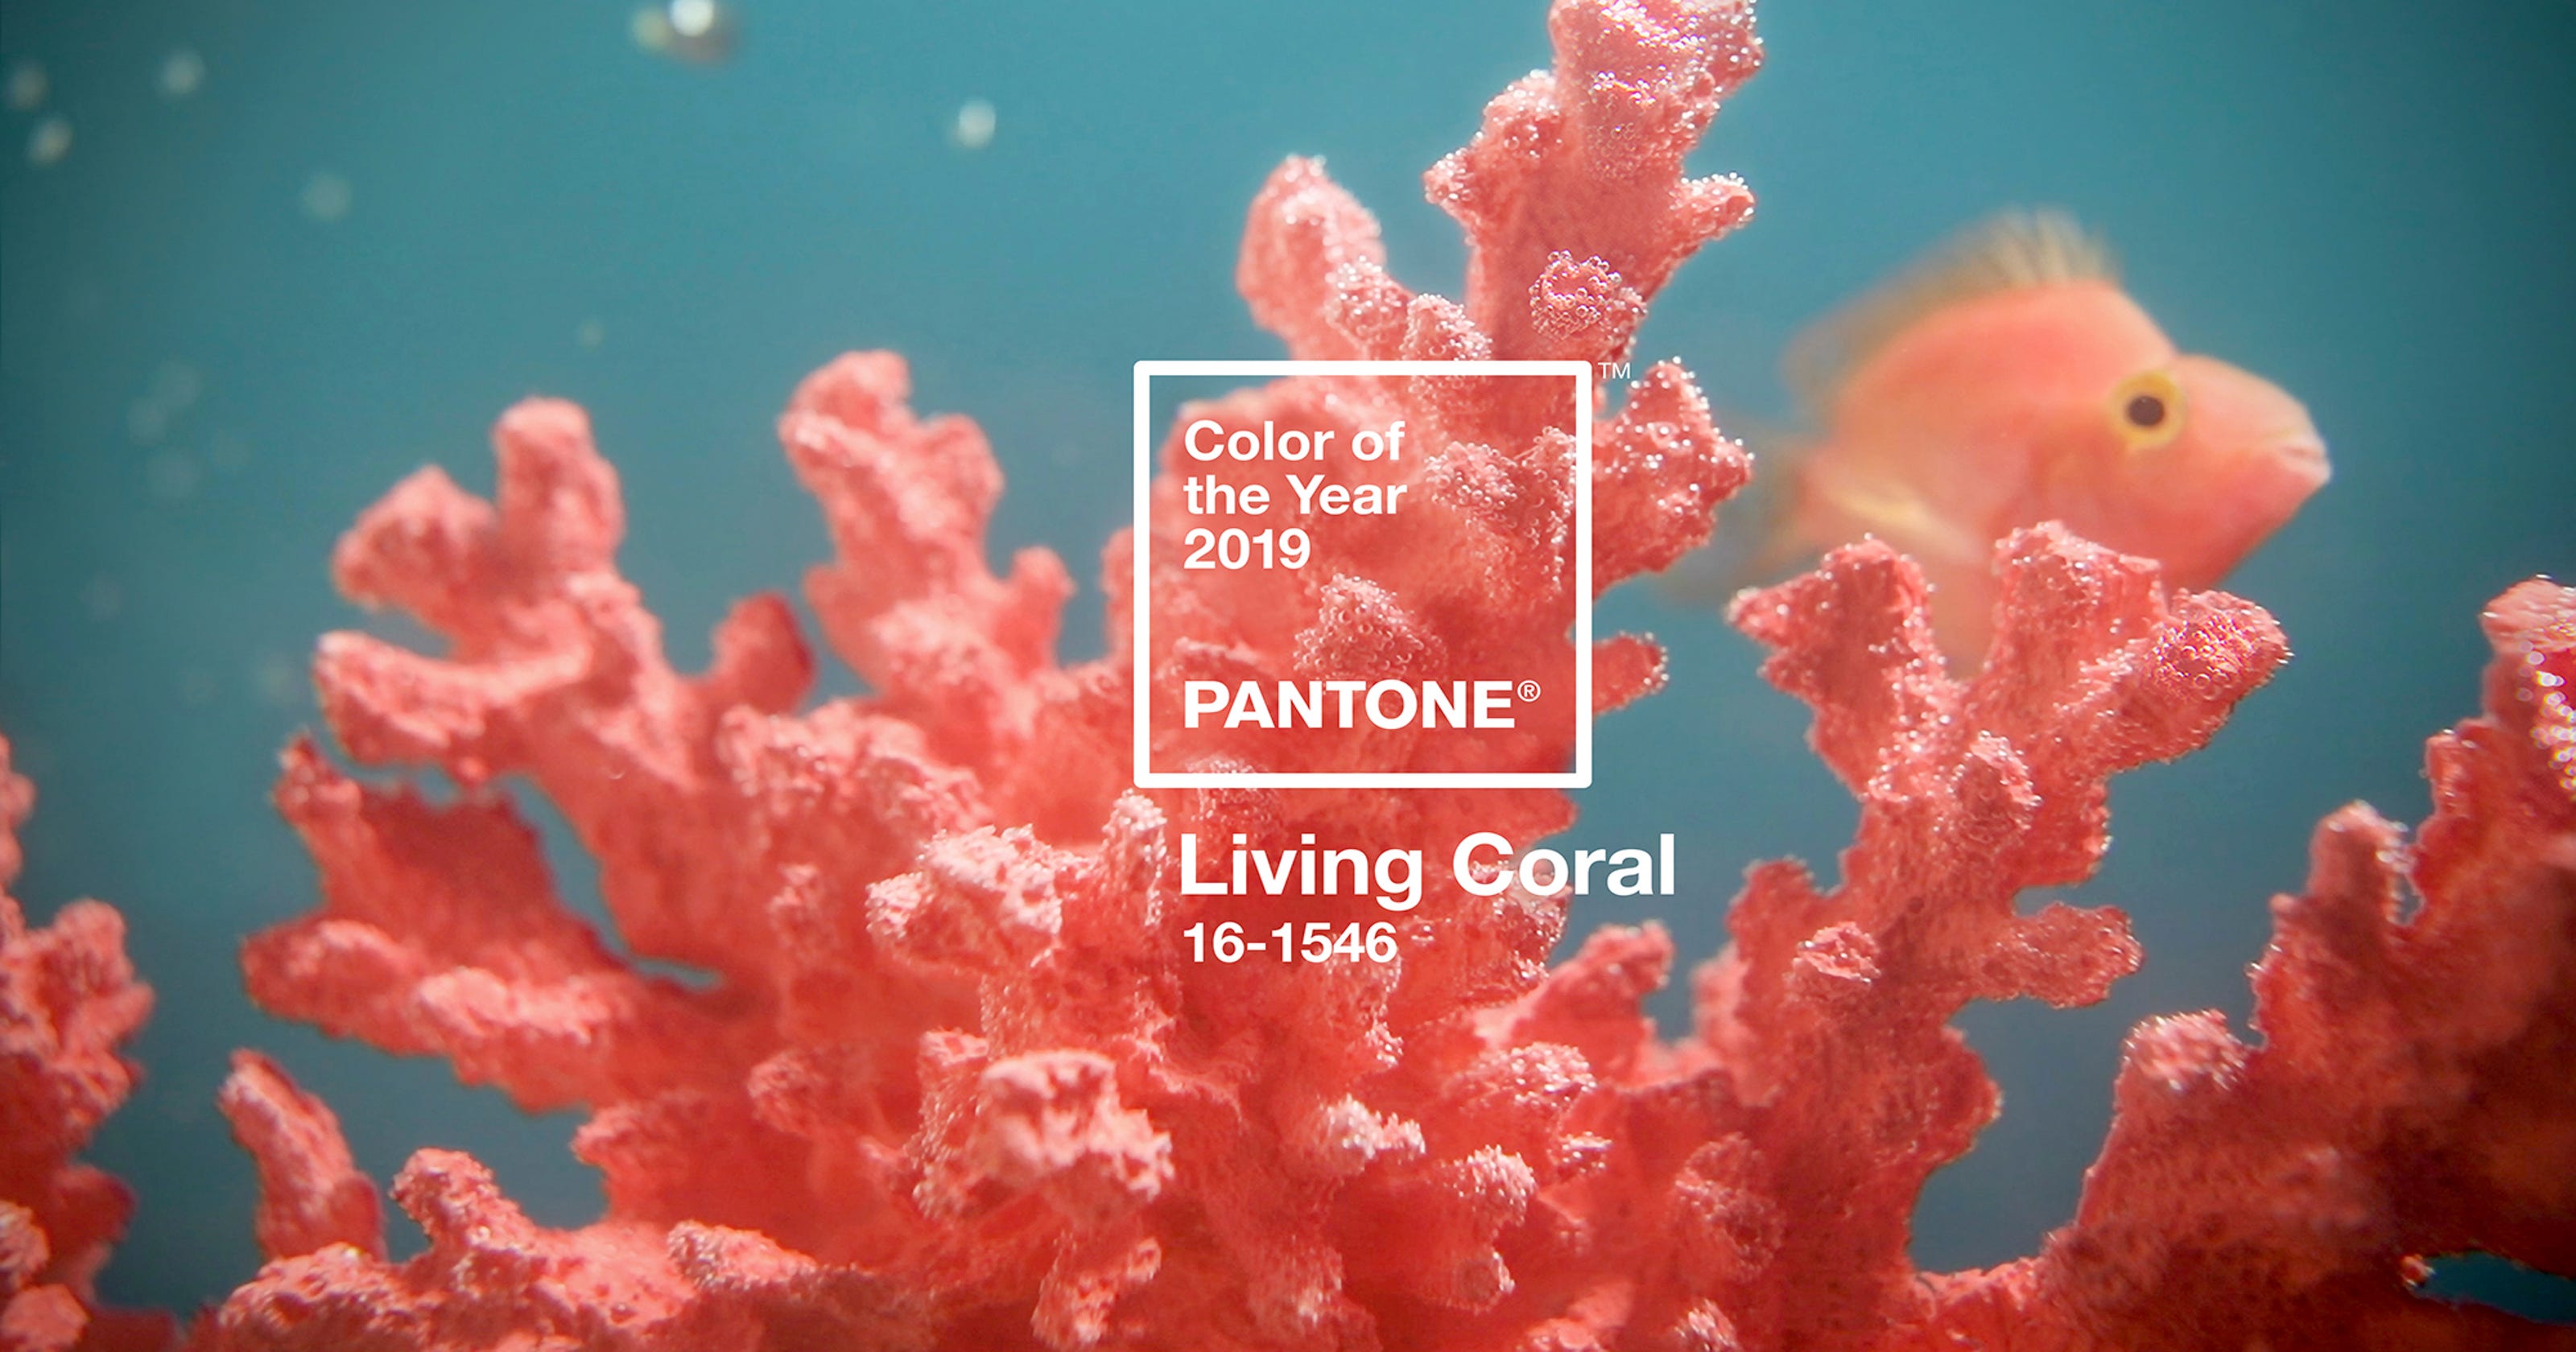 Pantone names Living Coral 2019 Color of Year